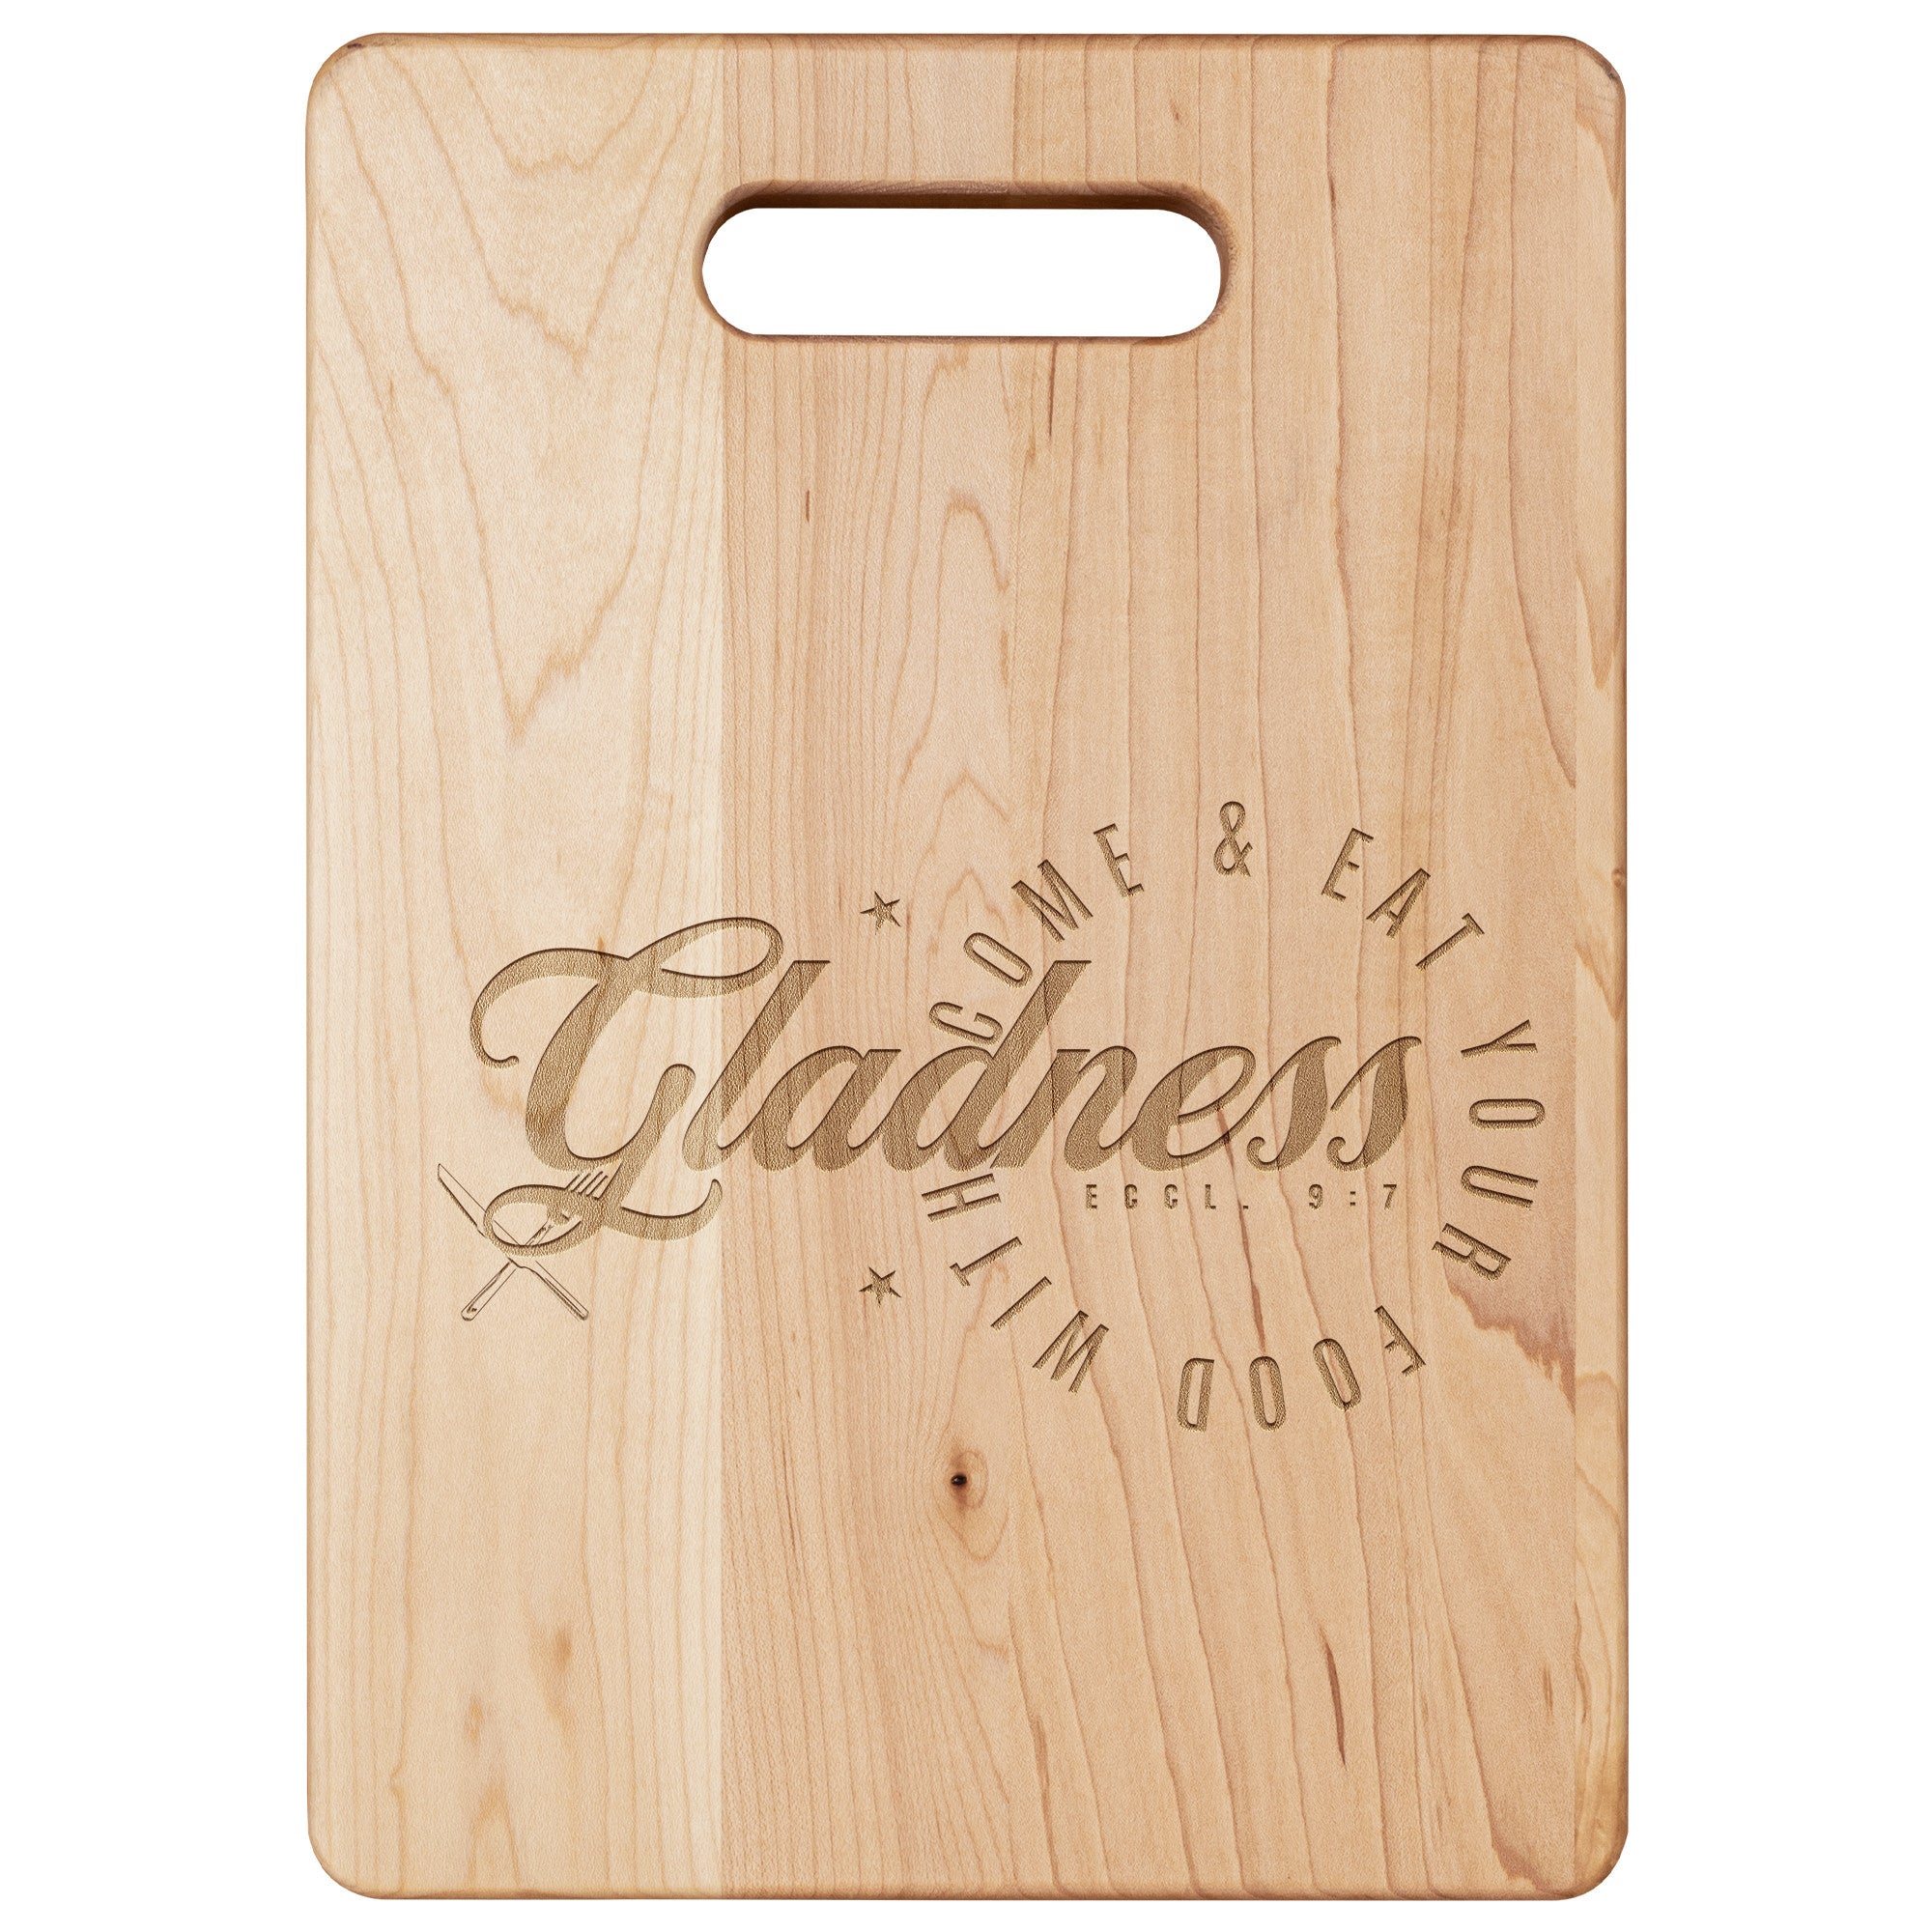 Gladness Charming Maple Laser Engraved Cutting Board with Handle | Soul Food Chopping Board | 3 Sizes | Wedding Gift | Gift